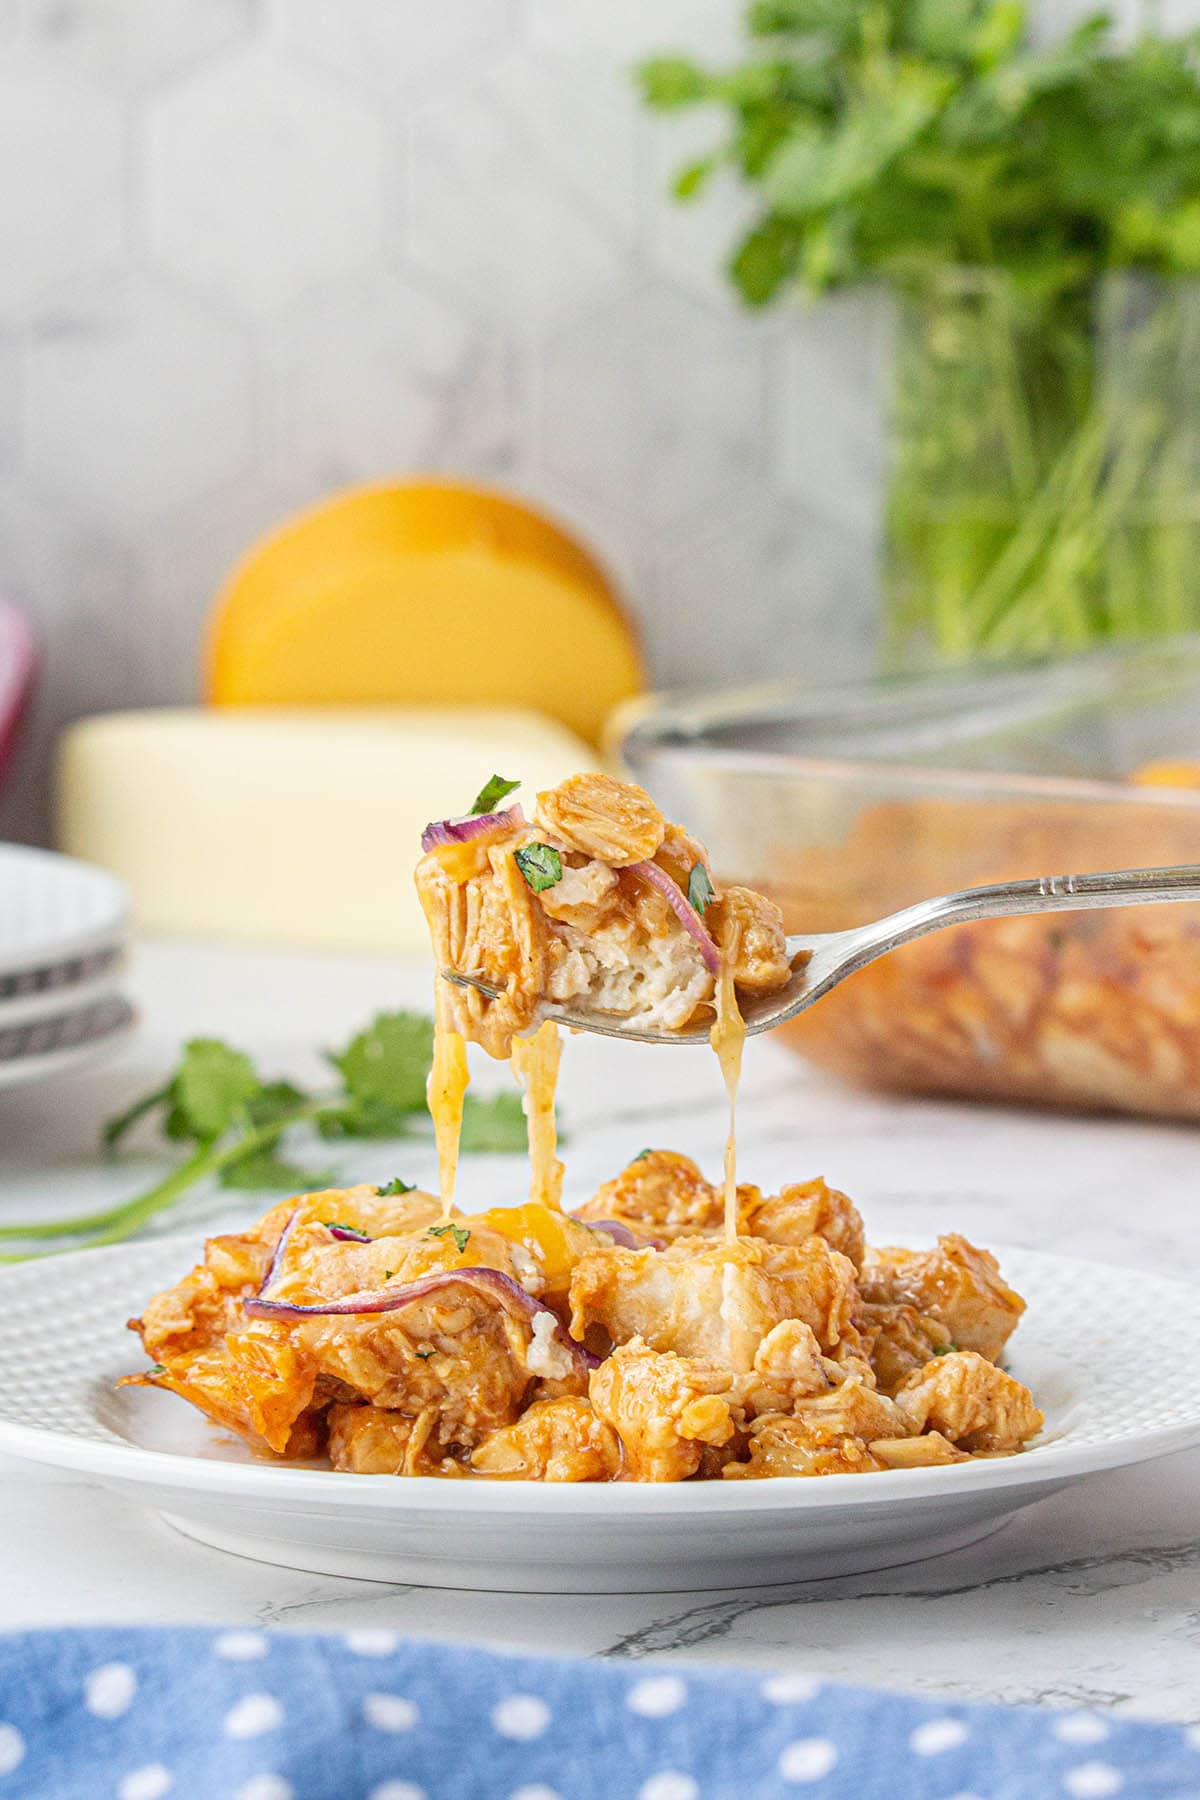 Plate with bbq chicken casserole with a fork filled and dripping with cheesy chicken.